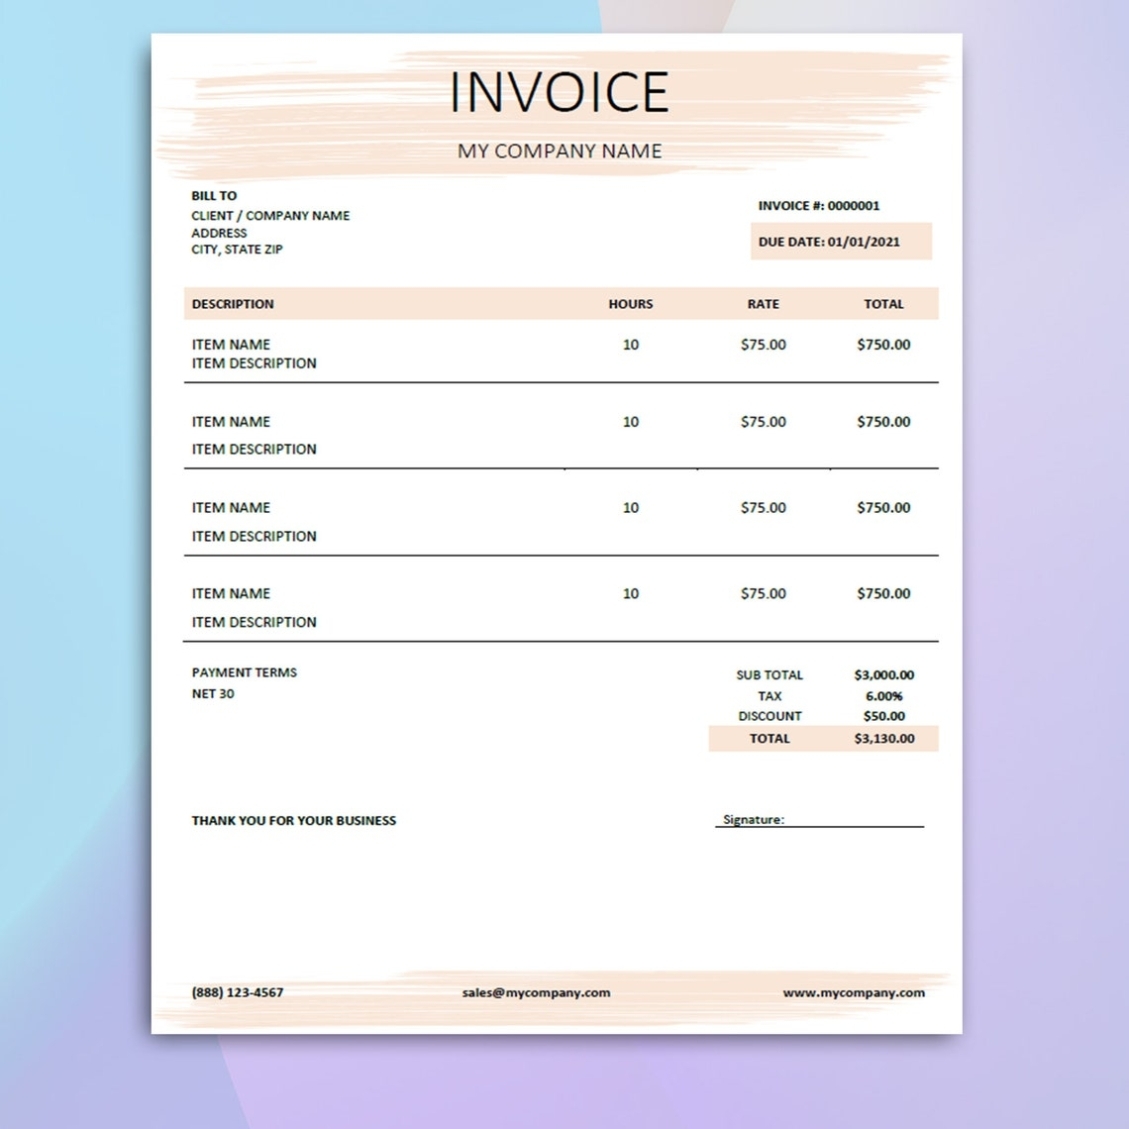 Invoice Template Word Printable & Editable Black And White | Etsy Intended For Black Invoice Template